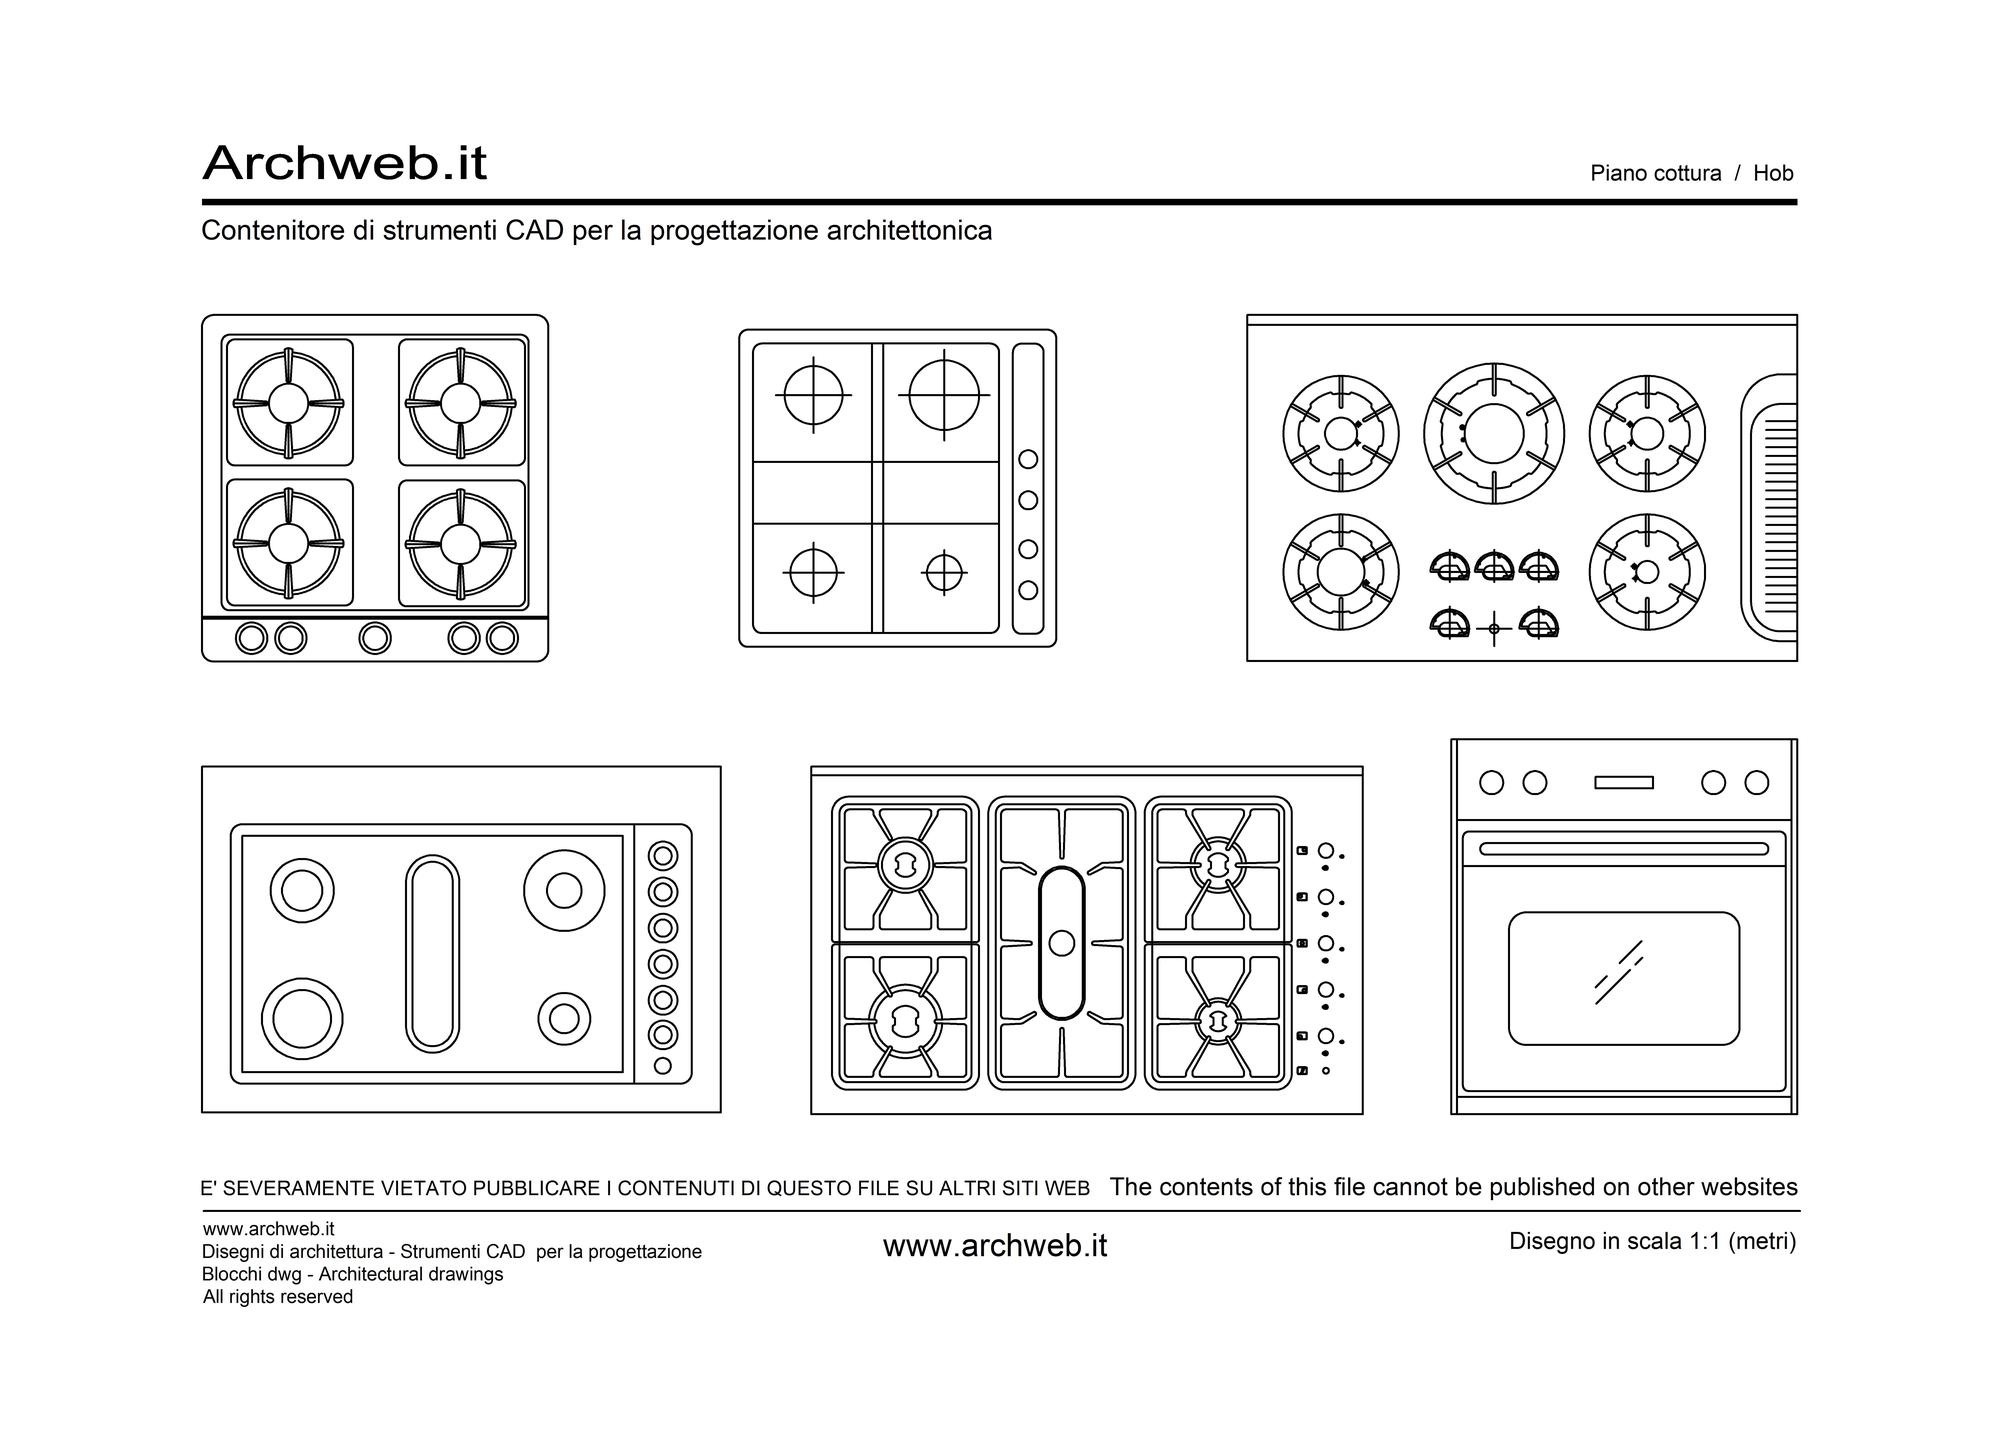 Dwg file with a selection of hobs of various types and sizes.